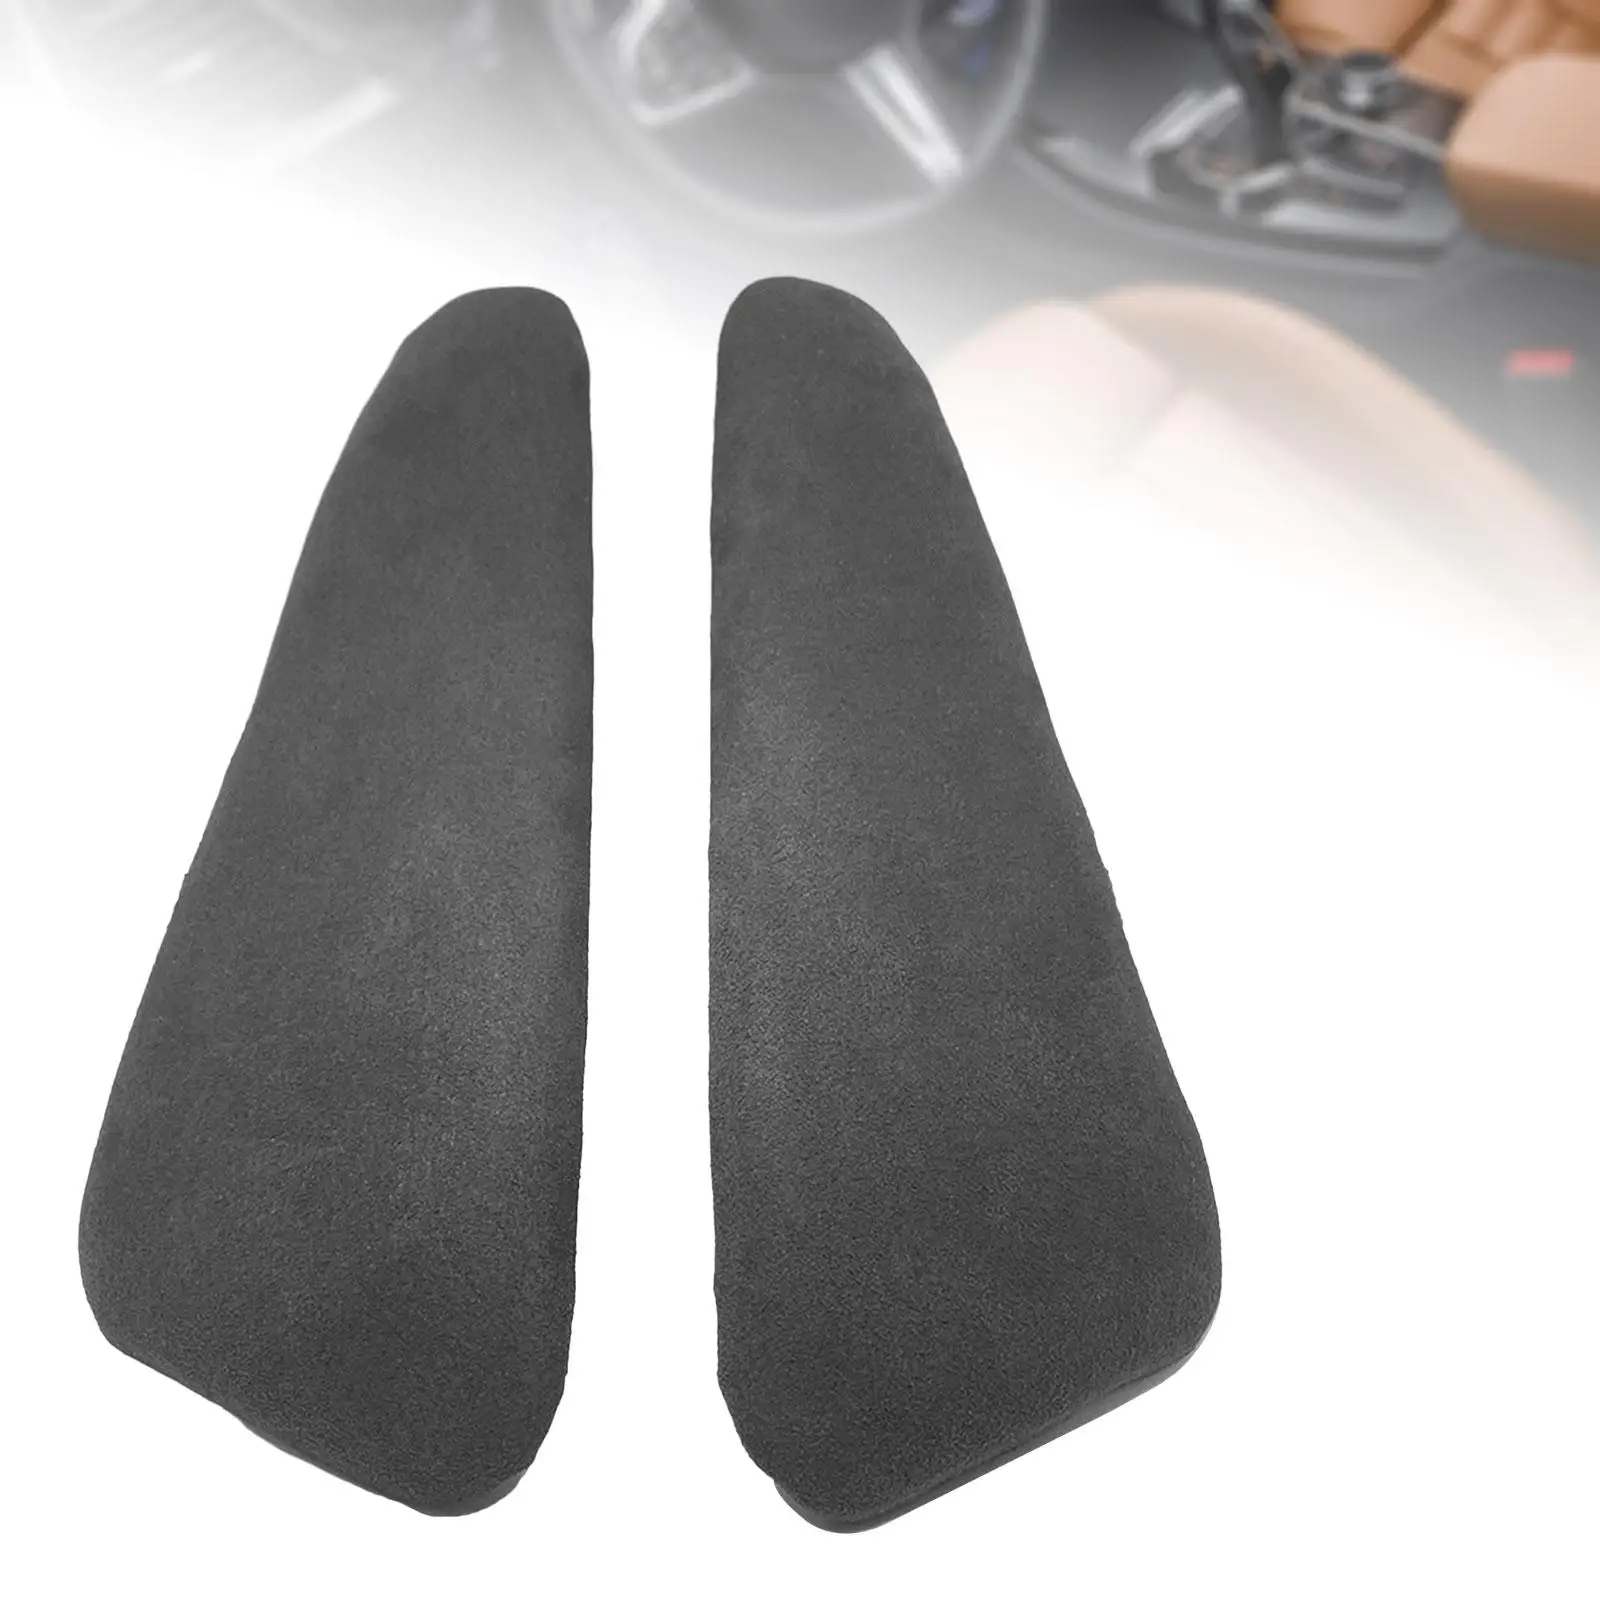 2x Car Knee Pad Cushions Center Console Automotive Knee Support Protective Pad